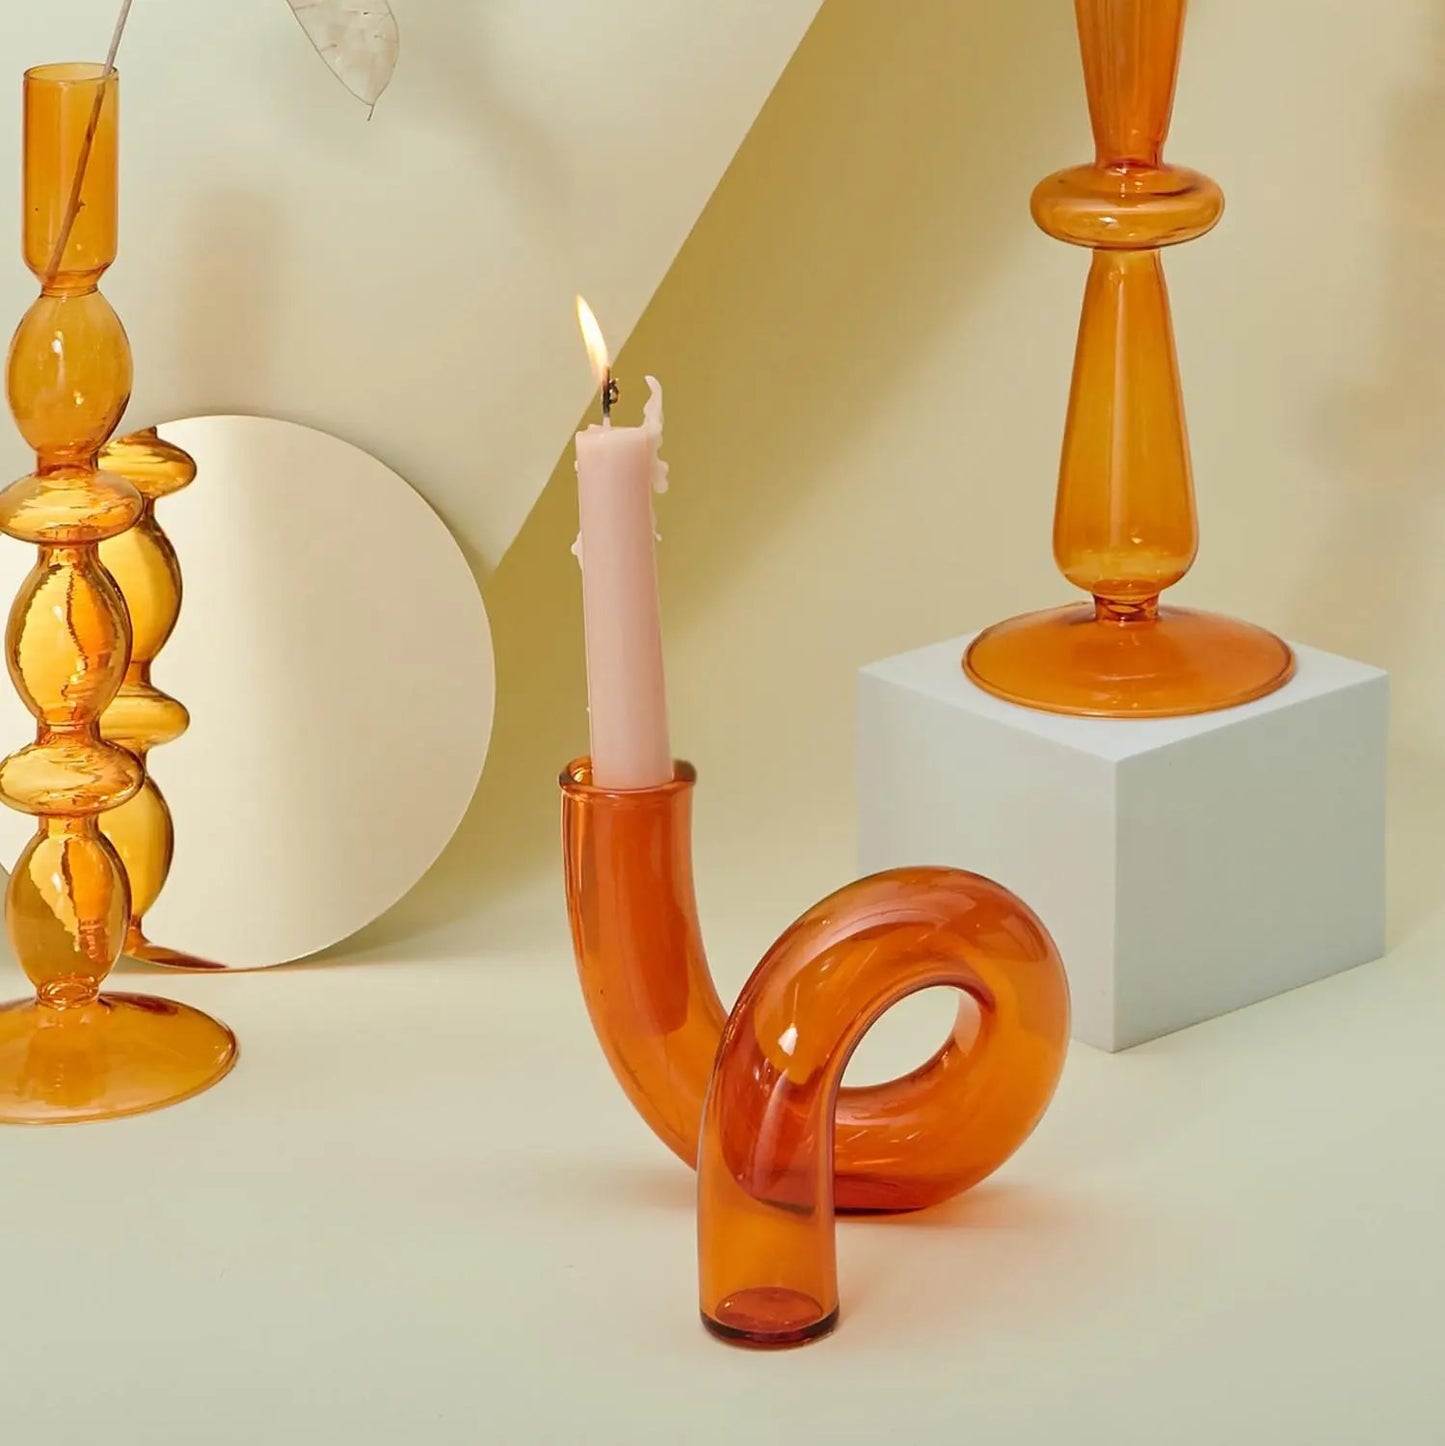 Leif - Nordic Glass Knot Candlestick Vases